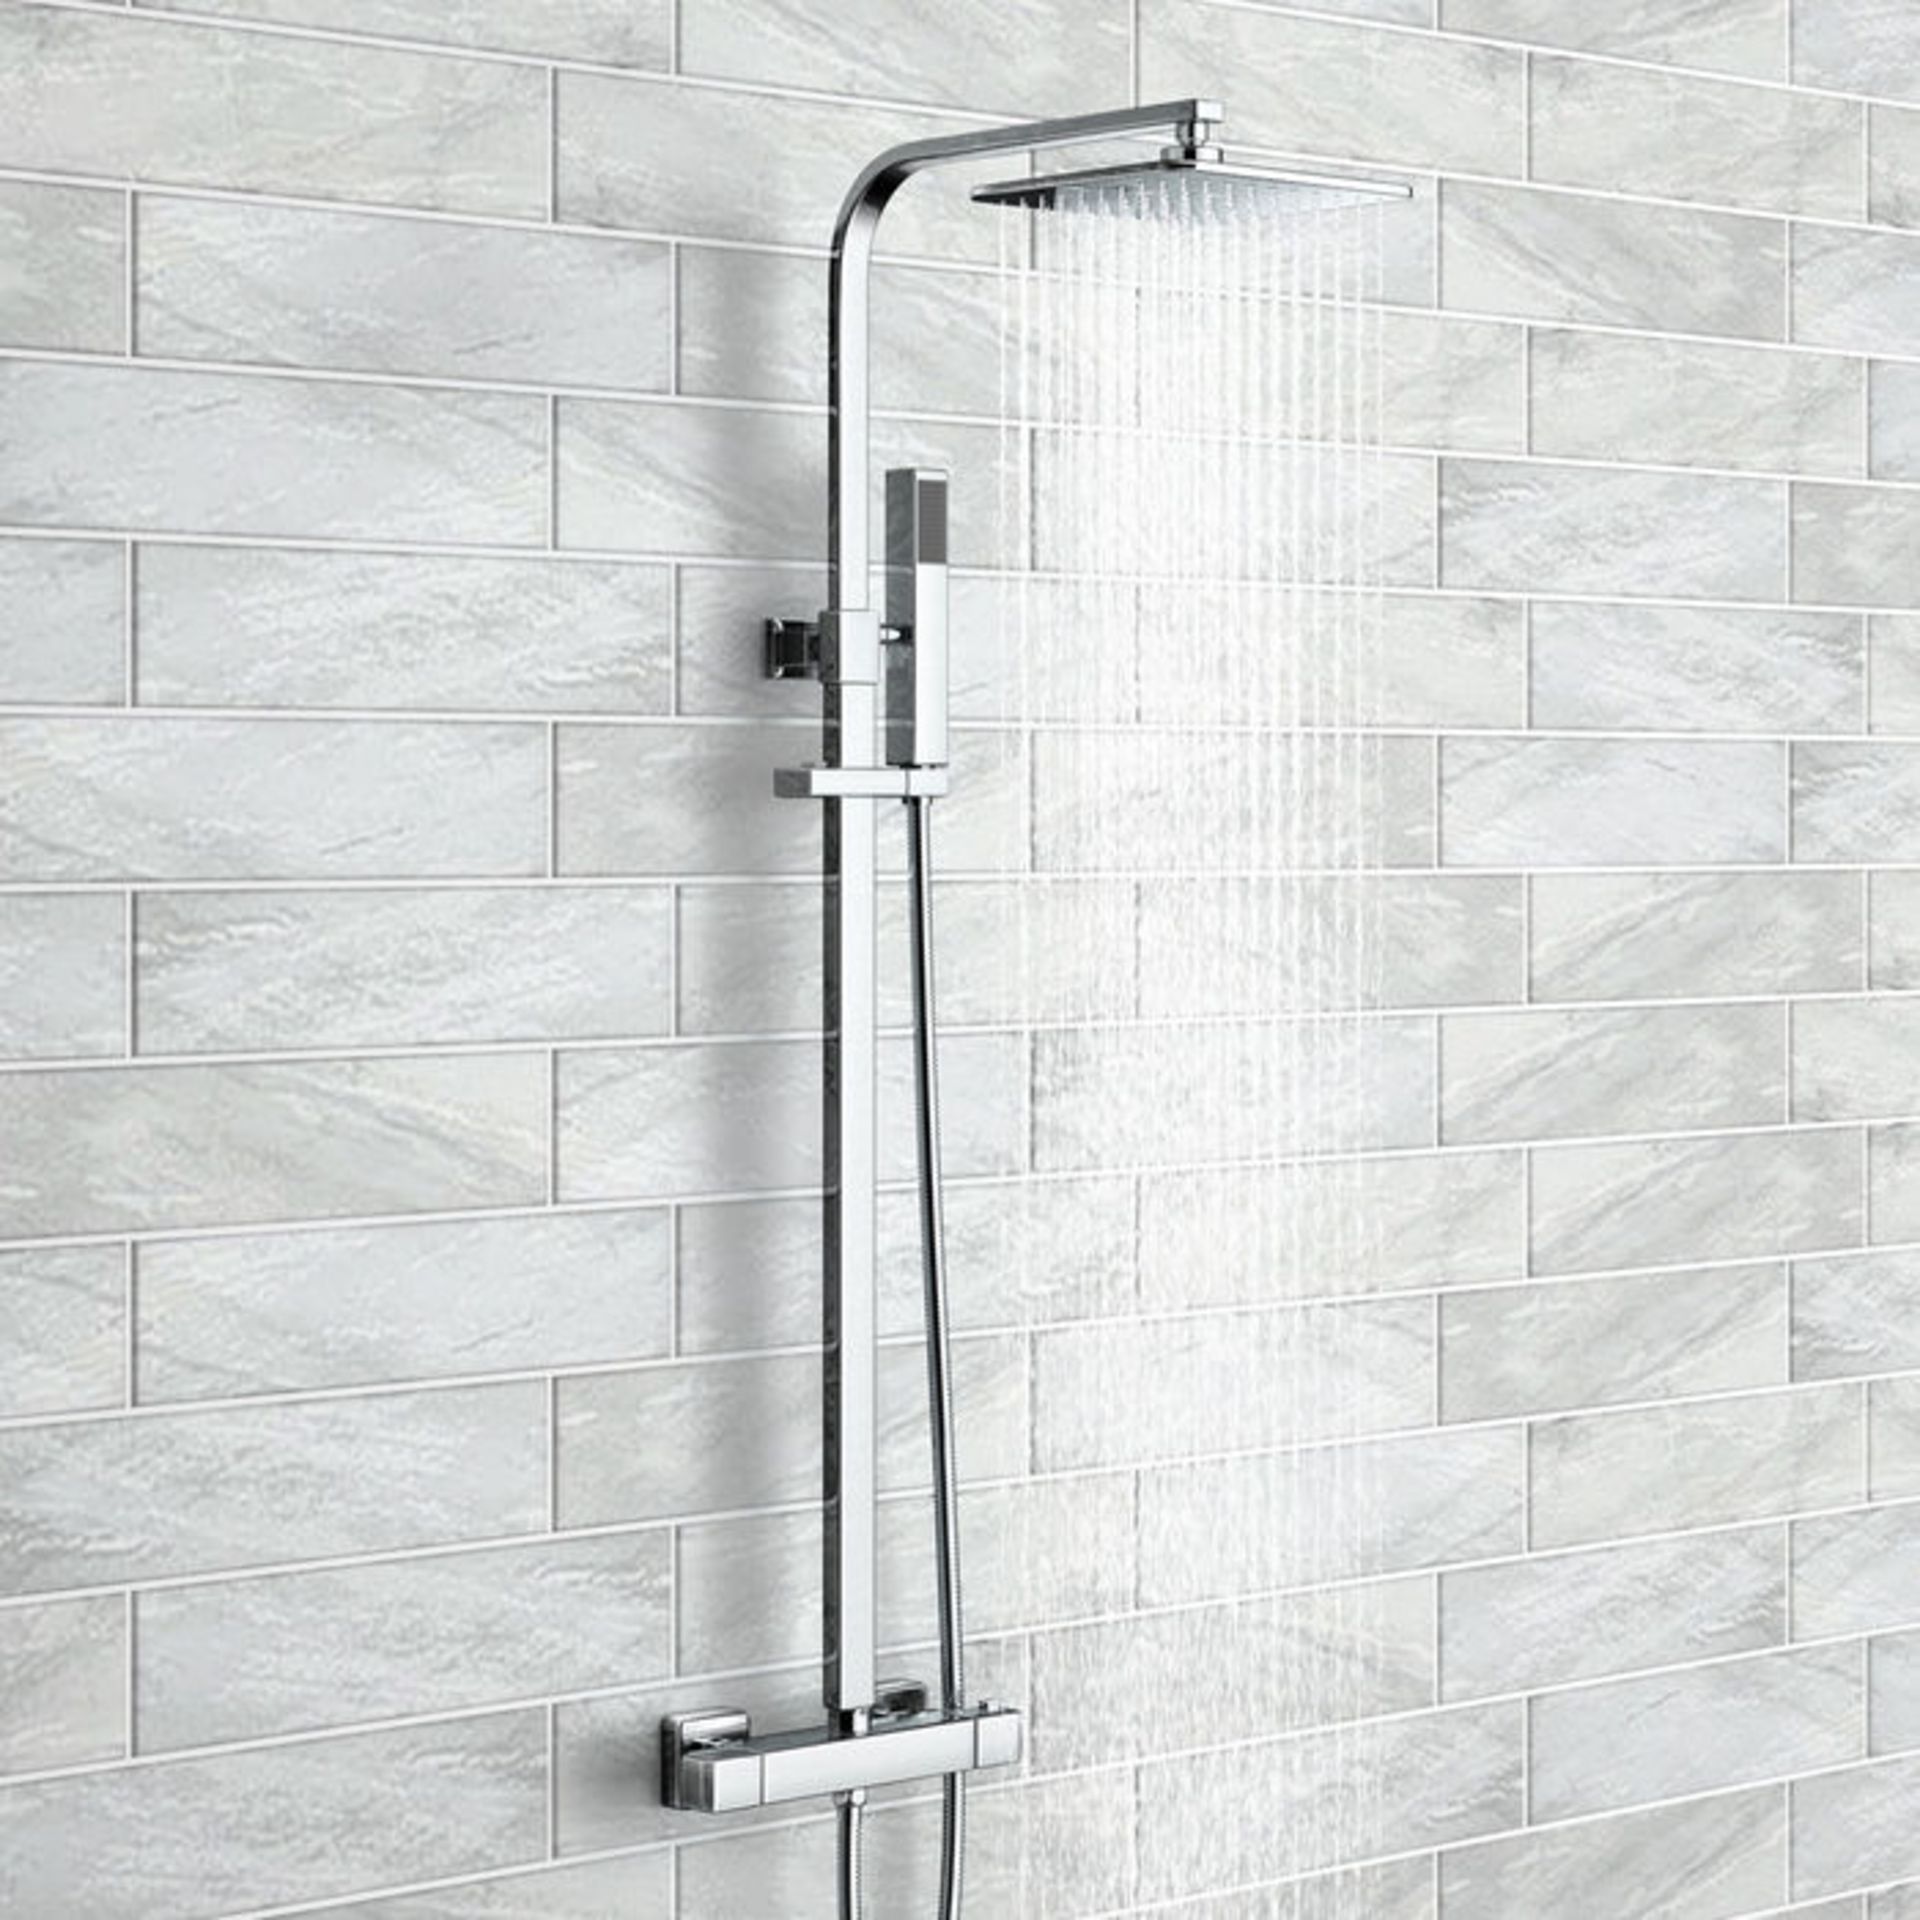 (G64) Square Exposed Thermostatic Shower Kit Medium Head. Style meets function with our gorgeous